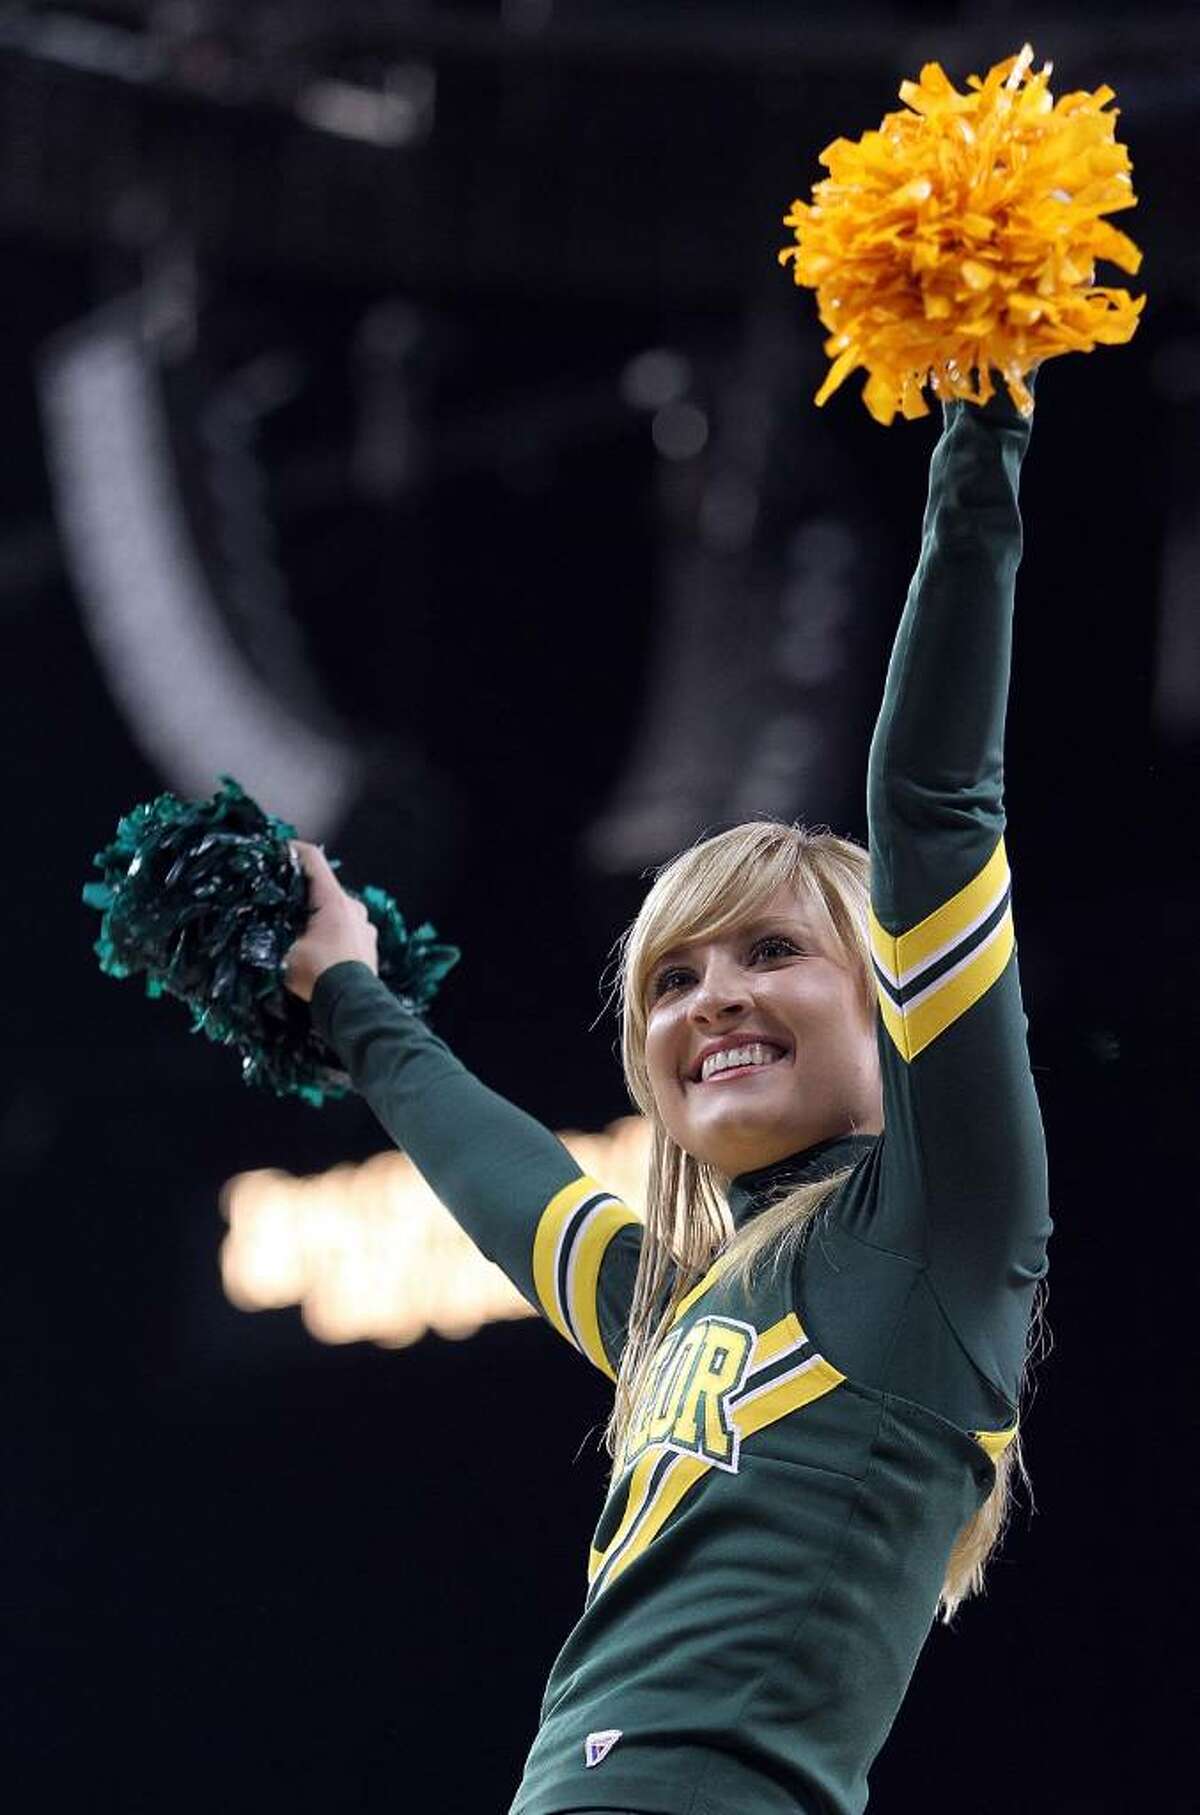 HOUSTON - MARCH 26: A Baylor Bears cheerleader during play against the St. Mary's Gaels during the south regional semifinal of the 2010 NCAA men's basketball tournament at Reliant Stadium on March 26, 2010 in Houston, Texas. (Photo by Ronald Martinez/Getty Images)